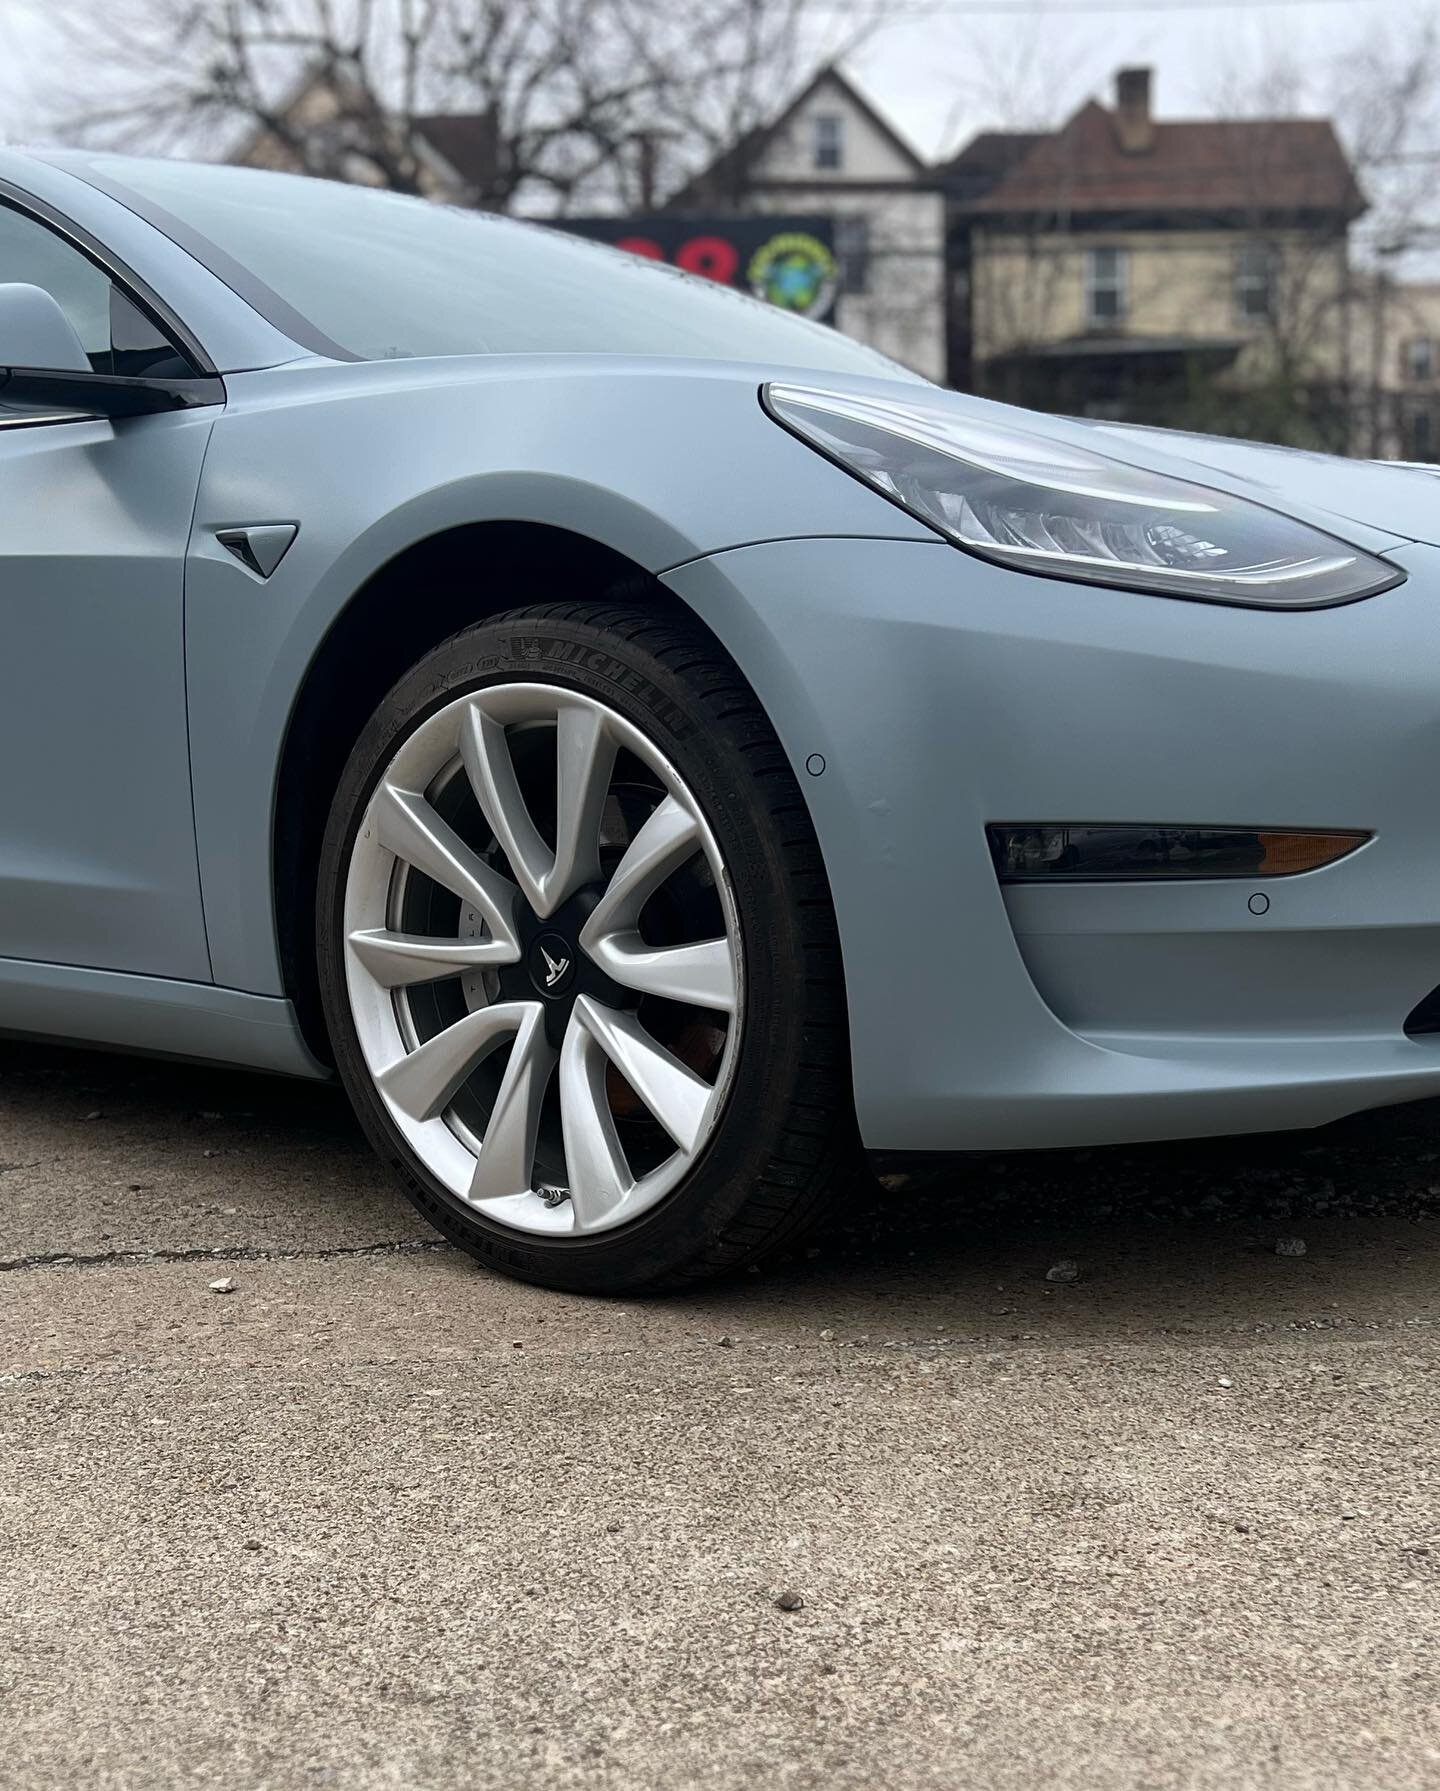 This @teslamotors M3 got a complete color change including the door jams and was topped off with @xpel fusion ceramic coating.